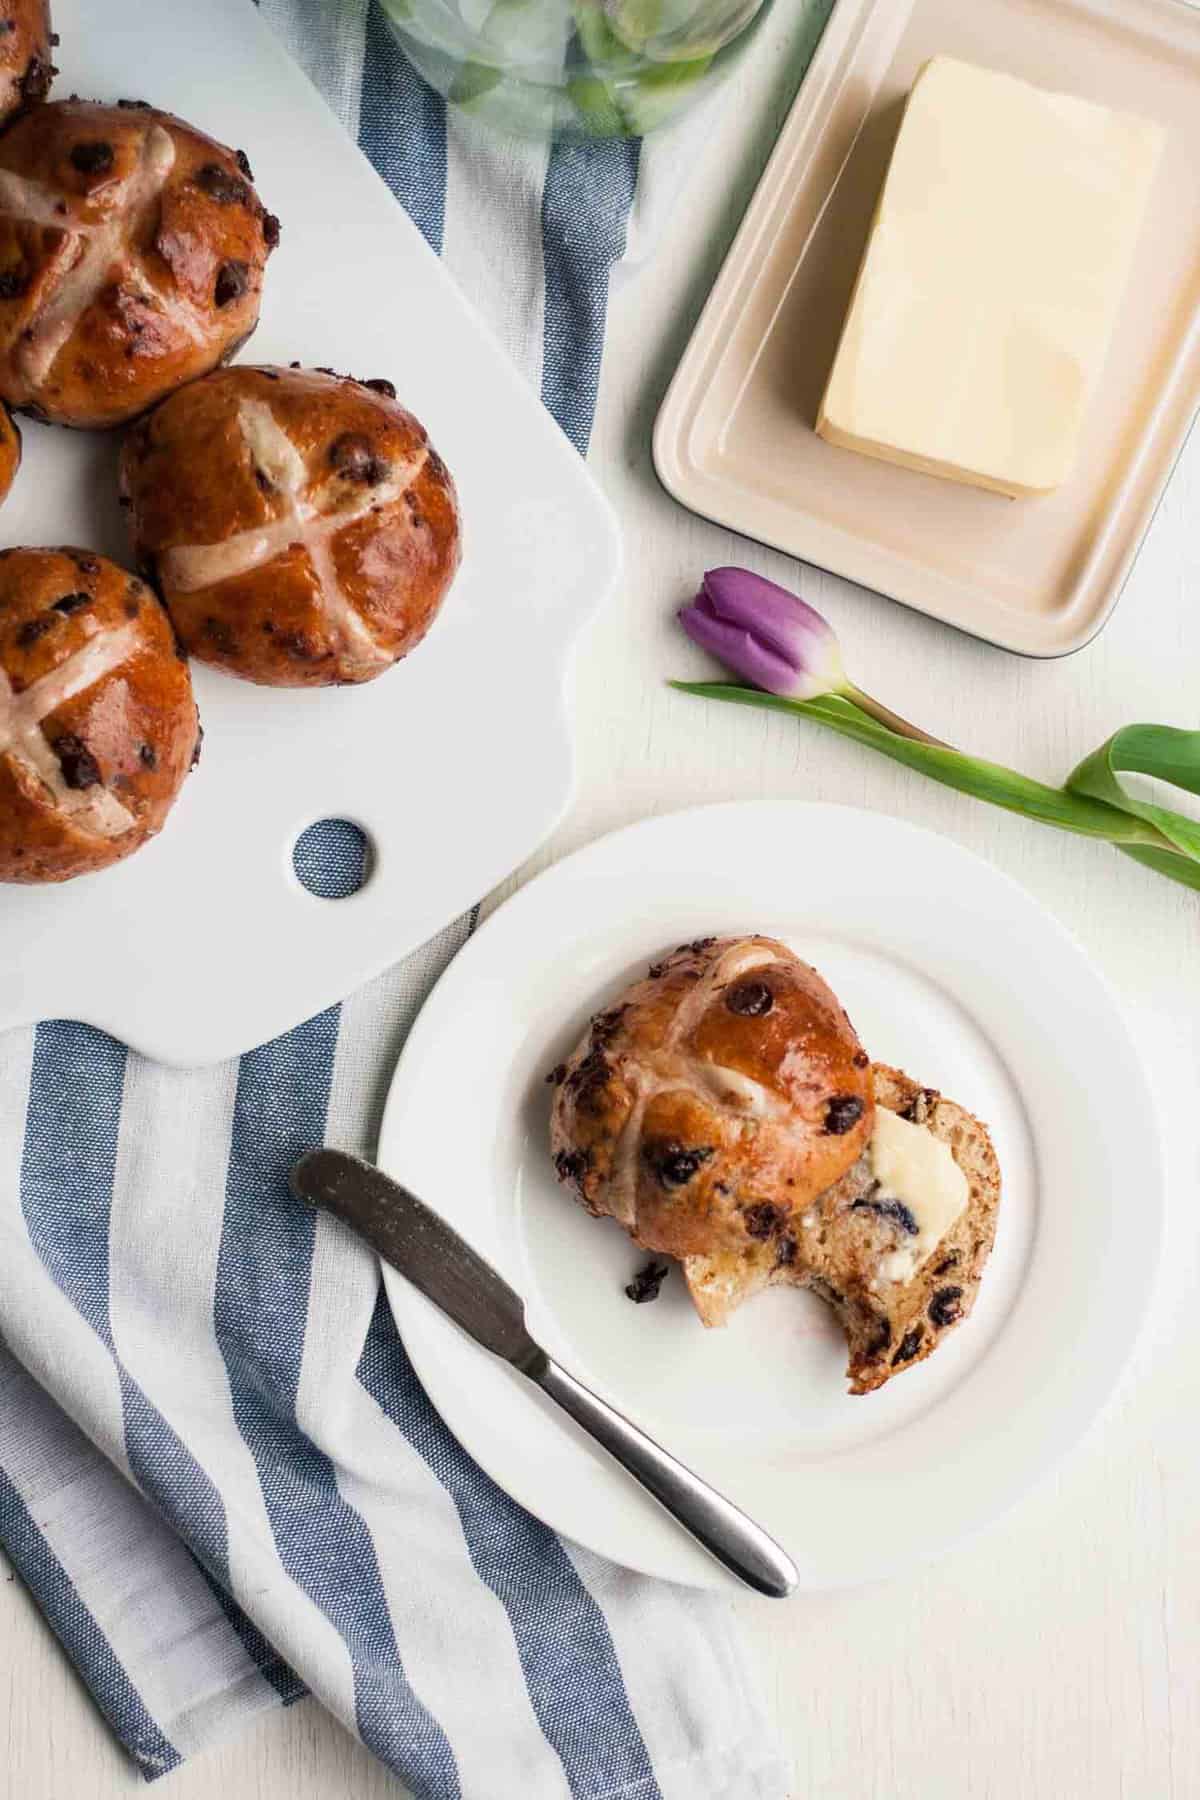 A plate and board with hot cross buns on with one spread with butter and a bite taken.